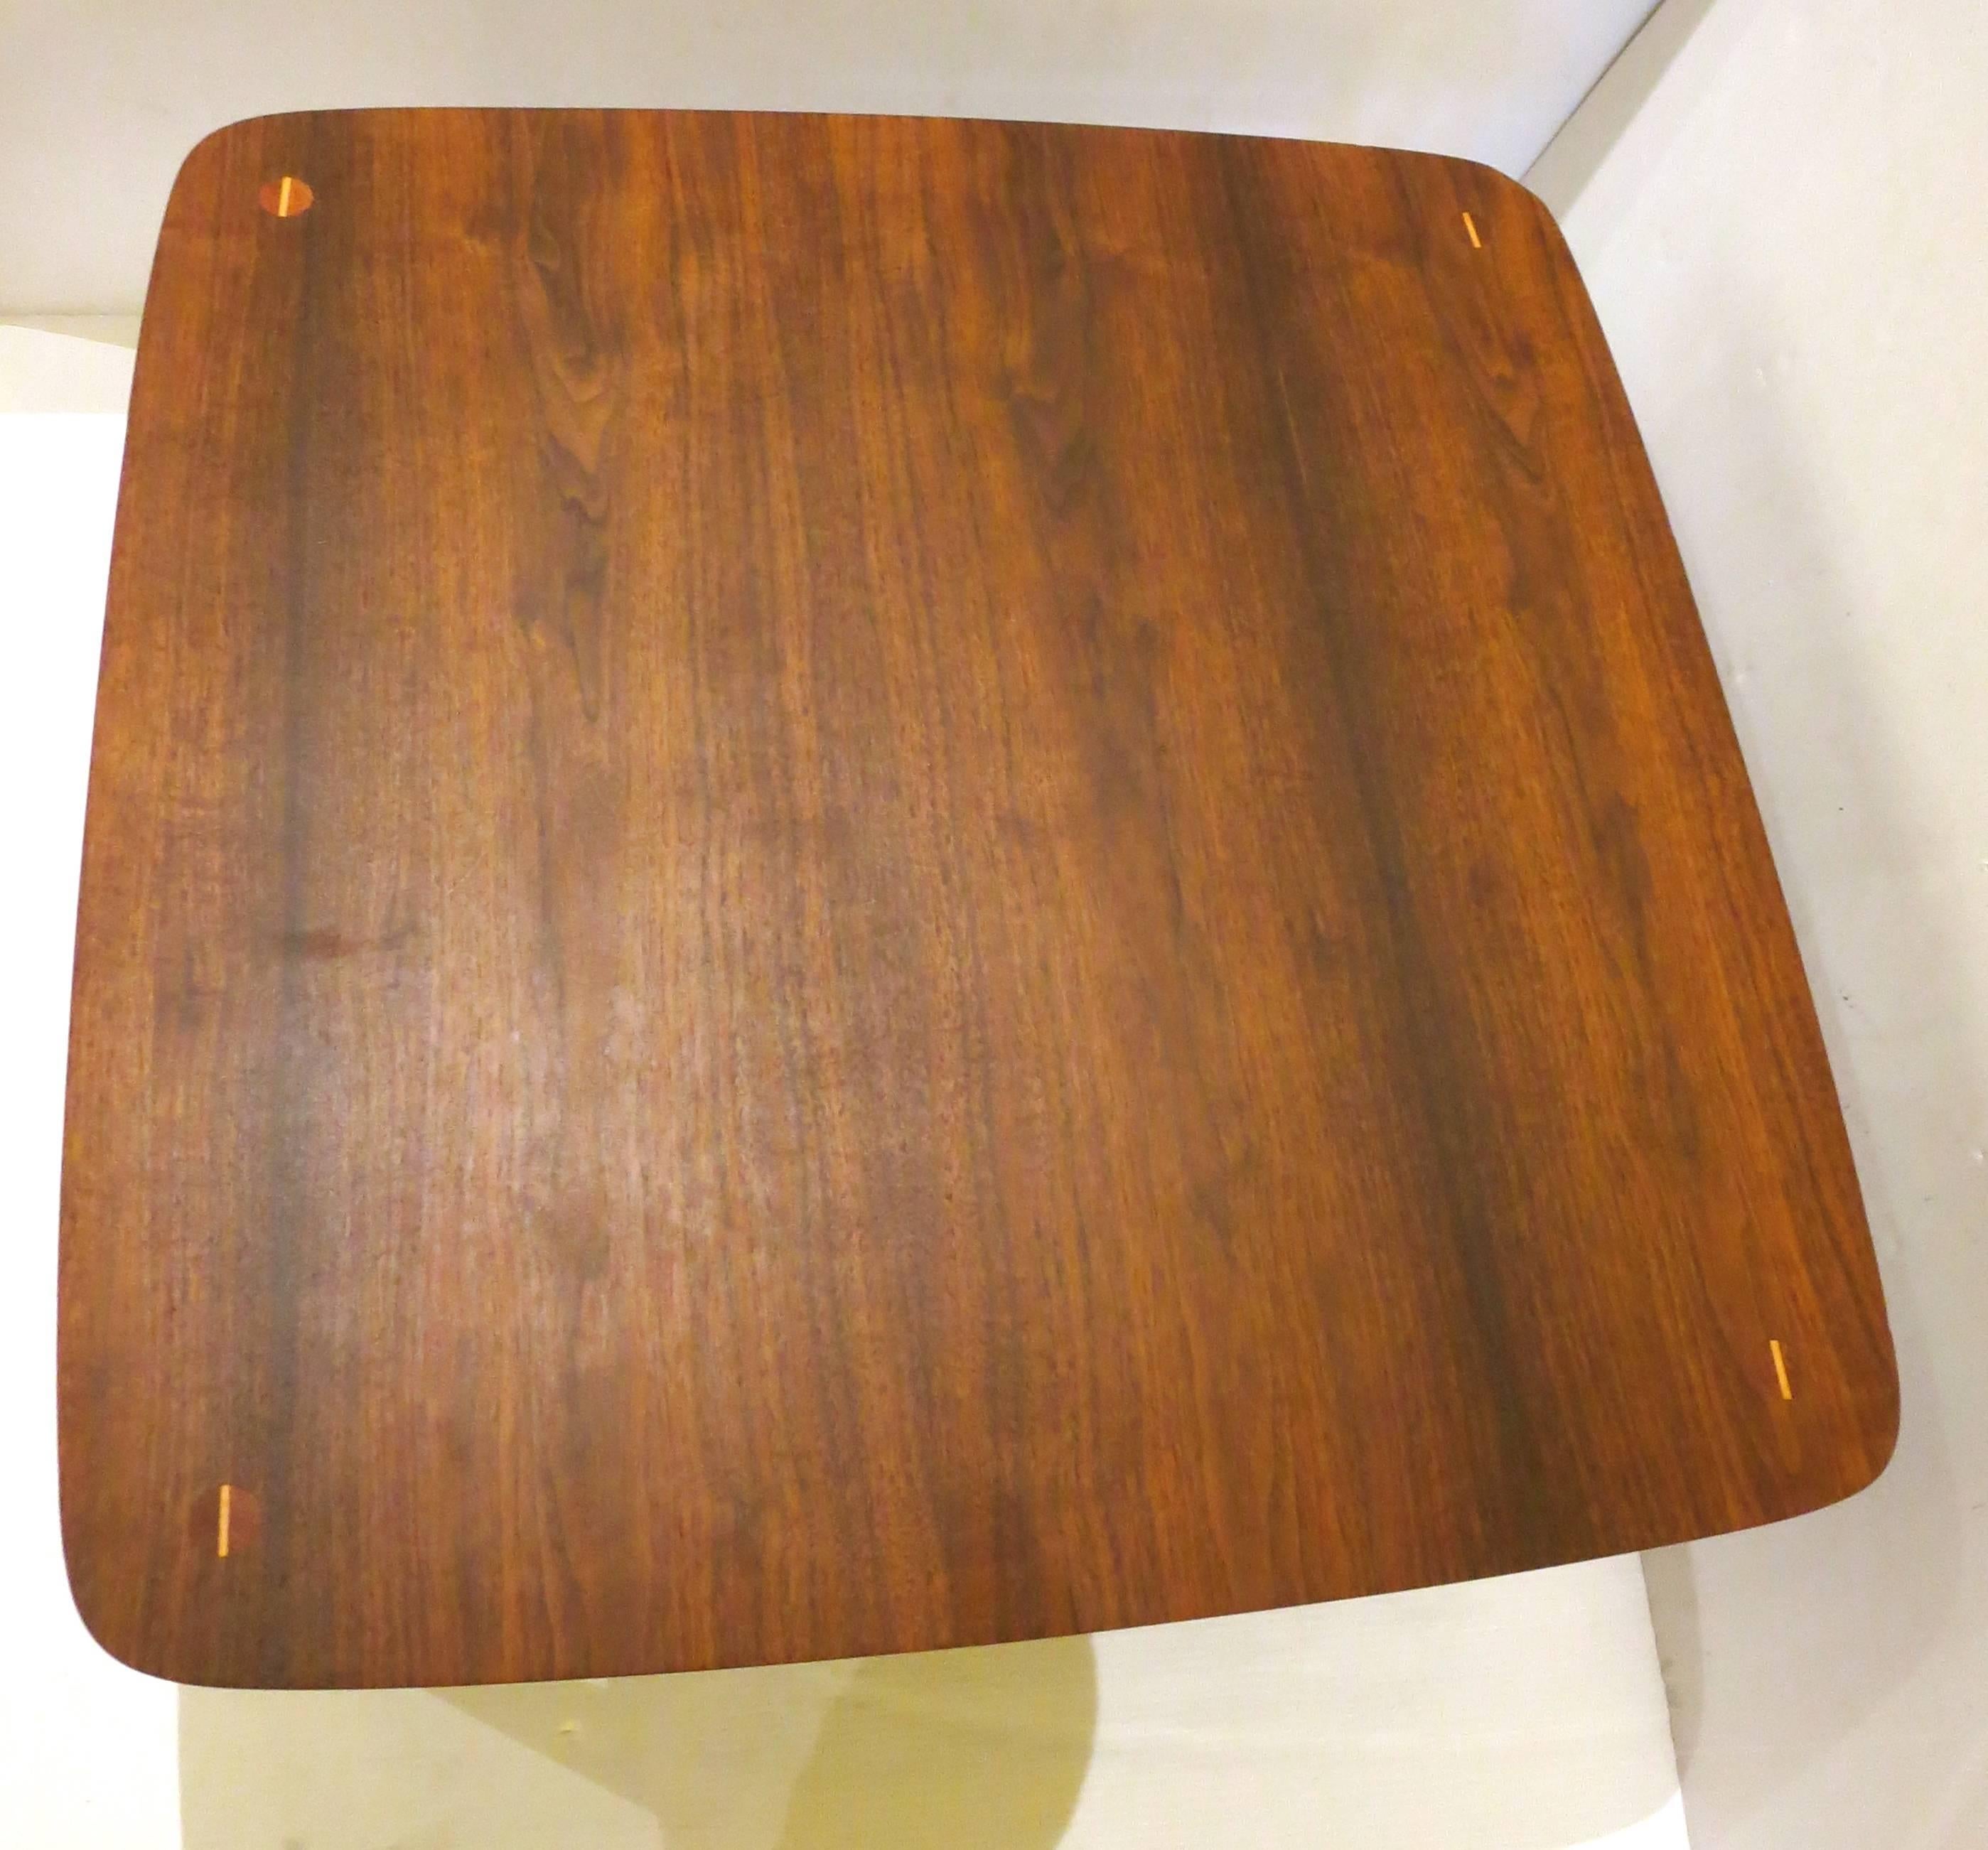 20th Century American Mid-Century Walnut Square Coffee or Cocktail Table with Magazine Rack